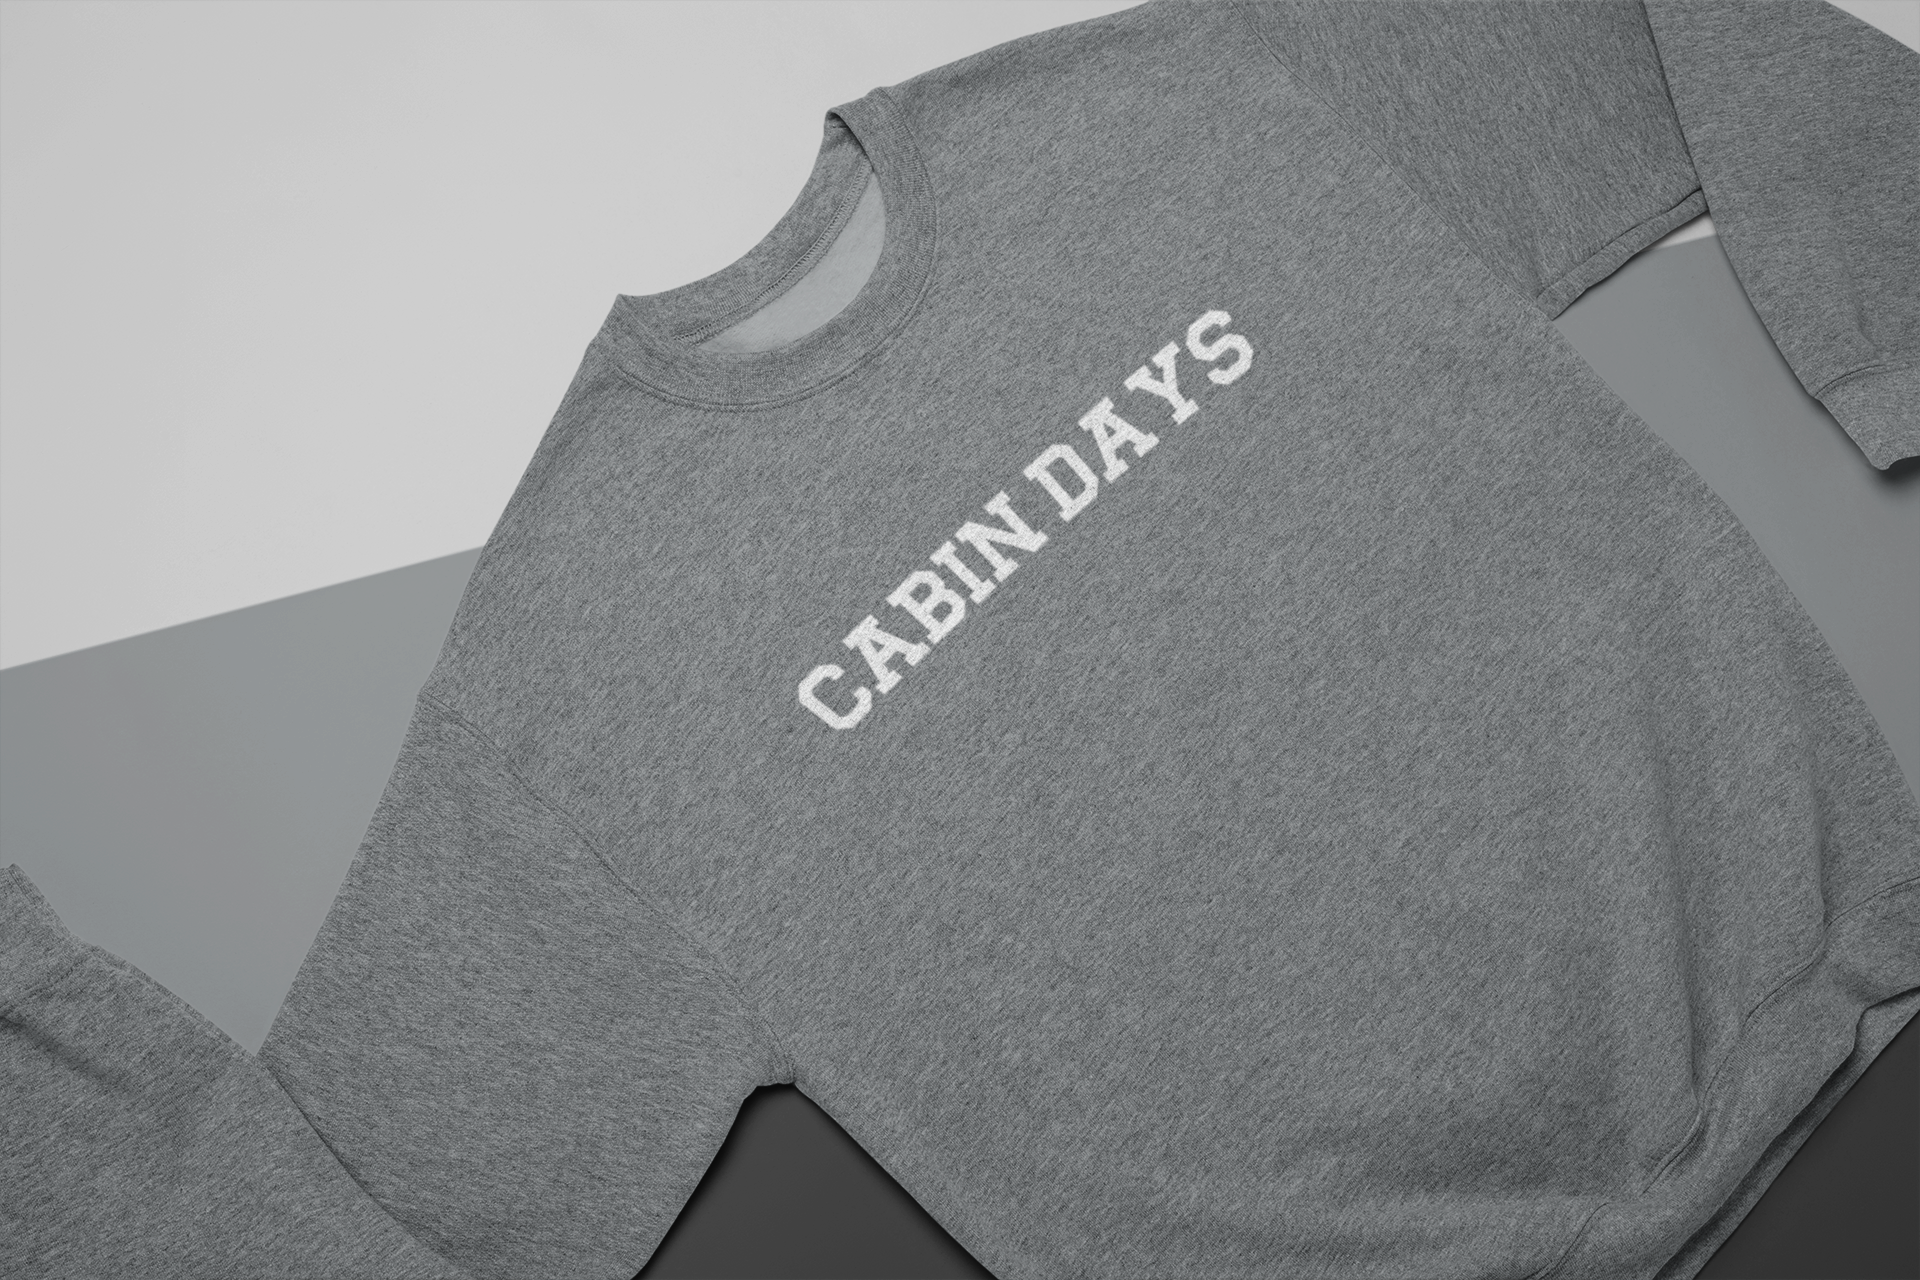 Cabin Days Sweatshirt Laid out Sweatshirt on a 3-toned background.